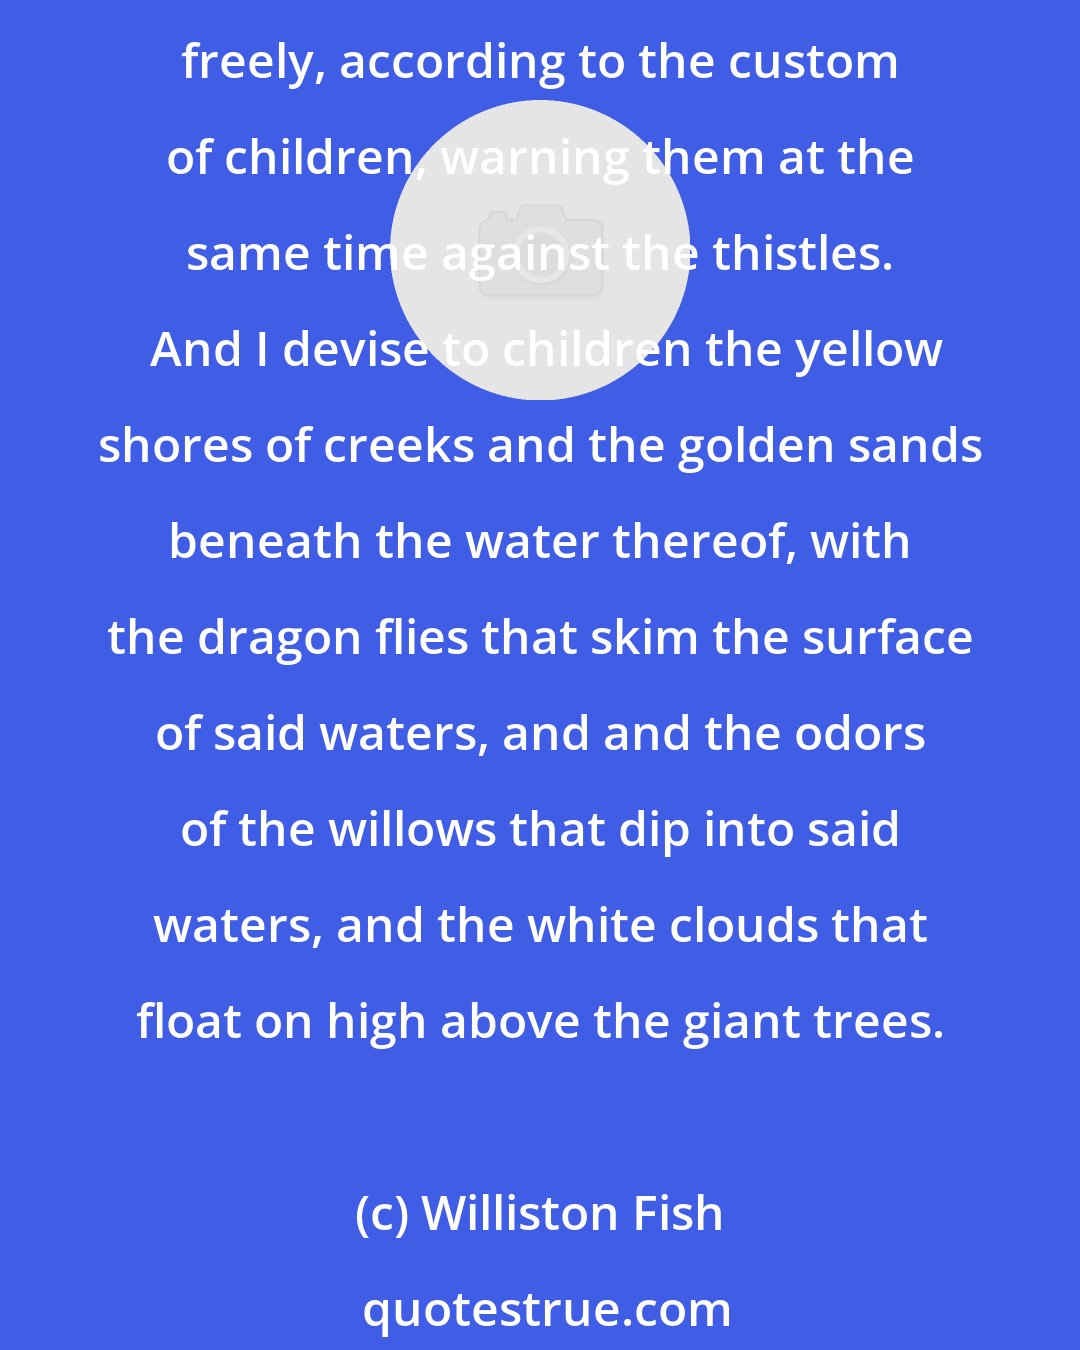 Williston Fish: I leave to children exclusively, but only for the life of their childhood, all and every the dandelions of the fields and the daisies thereof, with the right to play among them freely, according to the custom of children, warning them at the same time against the thistles.  And I devise to children the yellow shores of creeks and the golden sands beneath the water thereof, with the dragon flies that skim the surface of said waters, and and the odors of the willows that dip into said waters, and the white clouds that float on high above the giant trees.